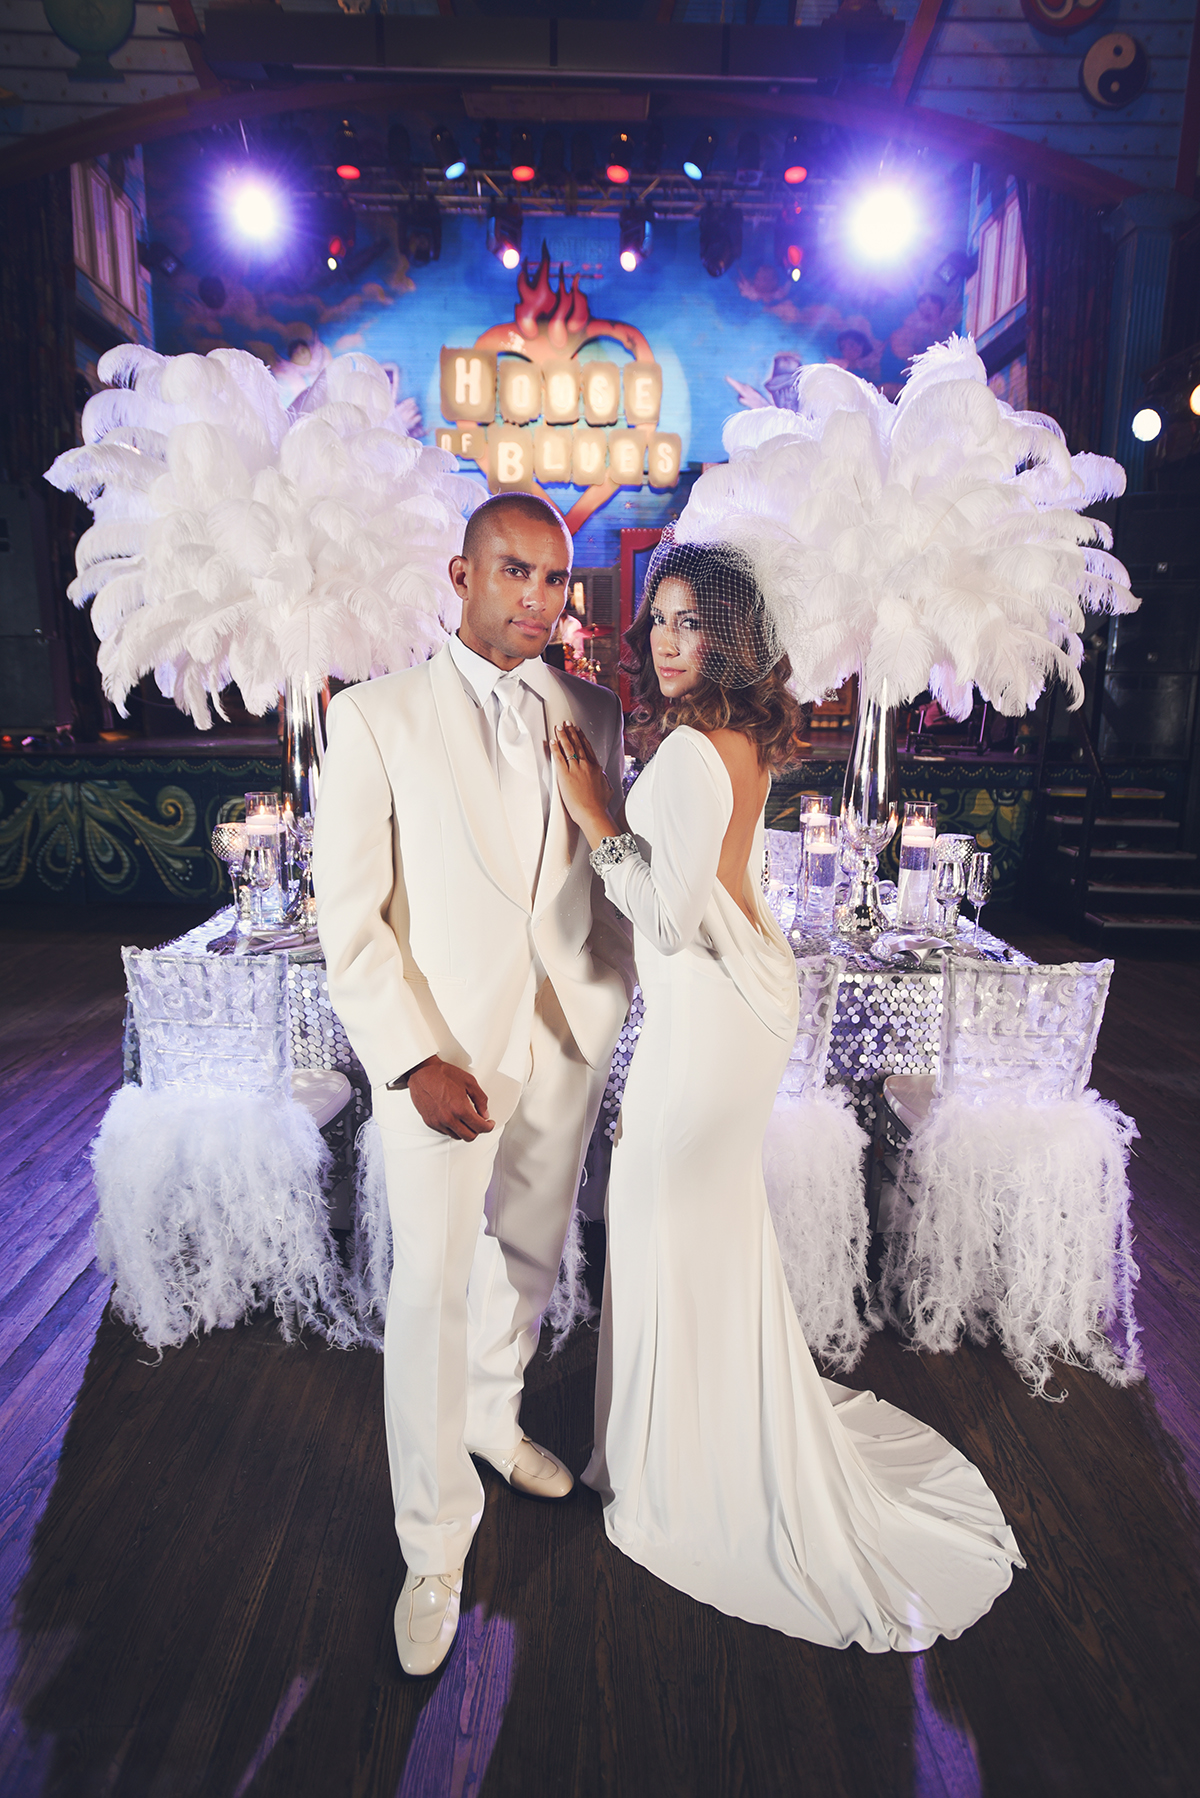 Sexy and chic, Fabiola stuns in a sleek, low-back ivory jersey bridal gown with rhinestone banding at the wrists. Charles' all-white ensemble from John's Tuxedos is perfect for the hot summer nights in New Orleans.